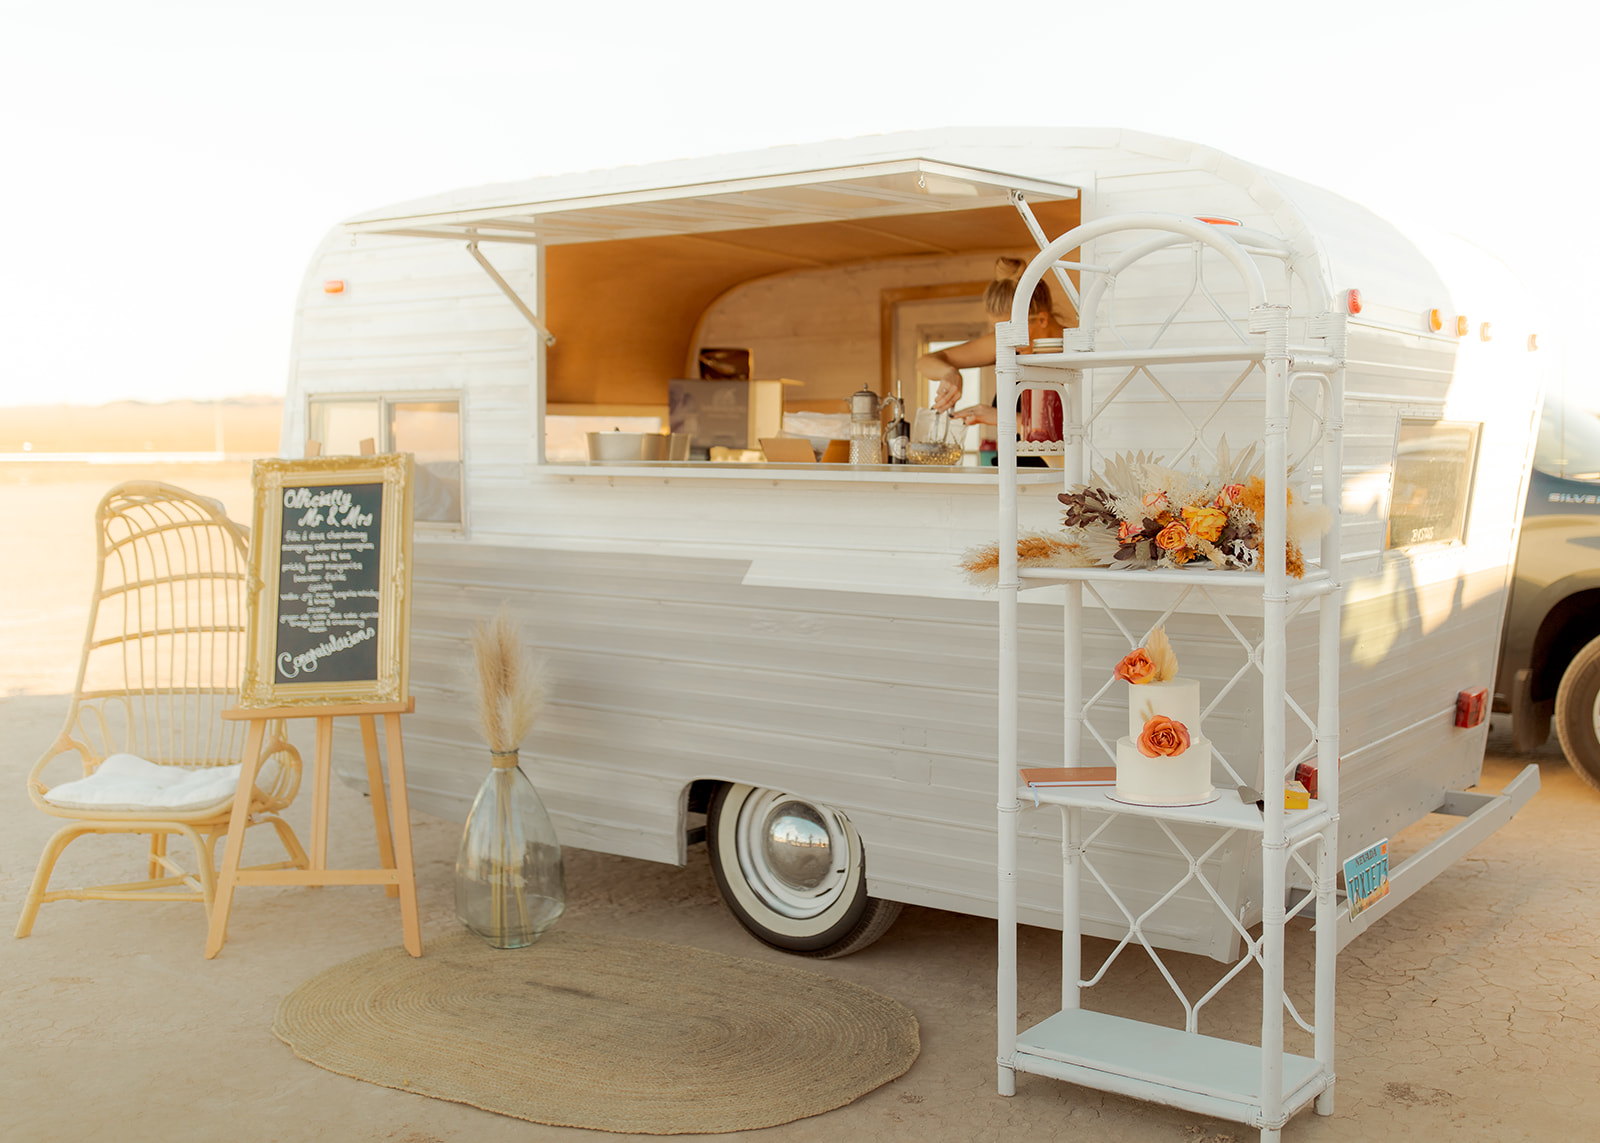 Mobil Bar for Dry Lake Bed Micro-Wedding